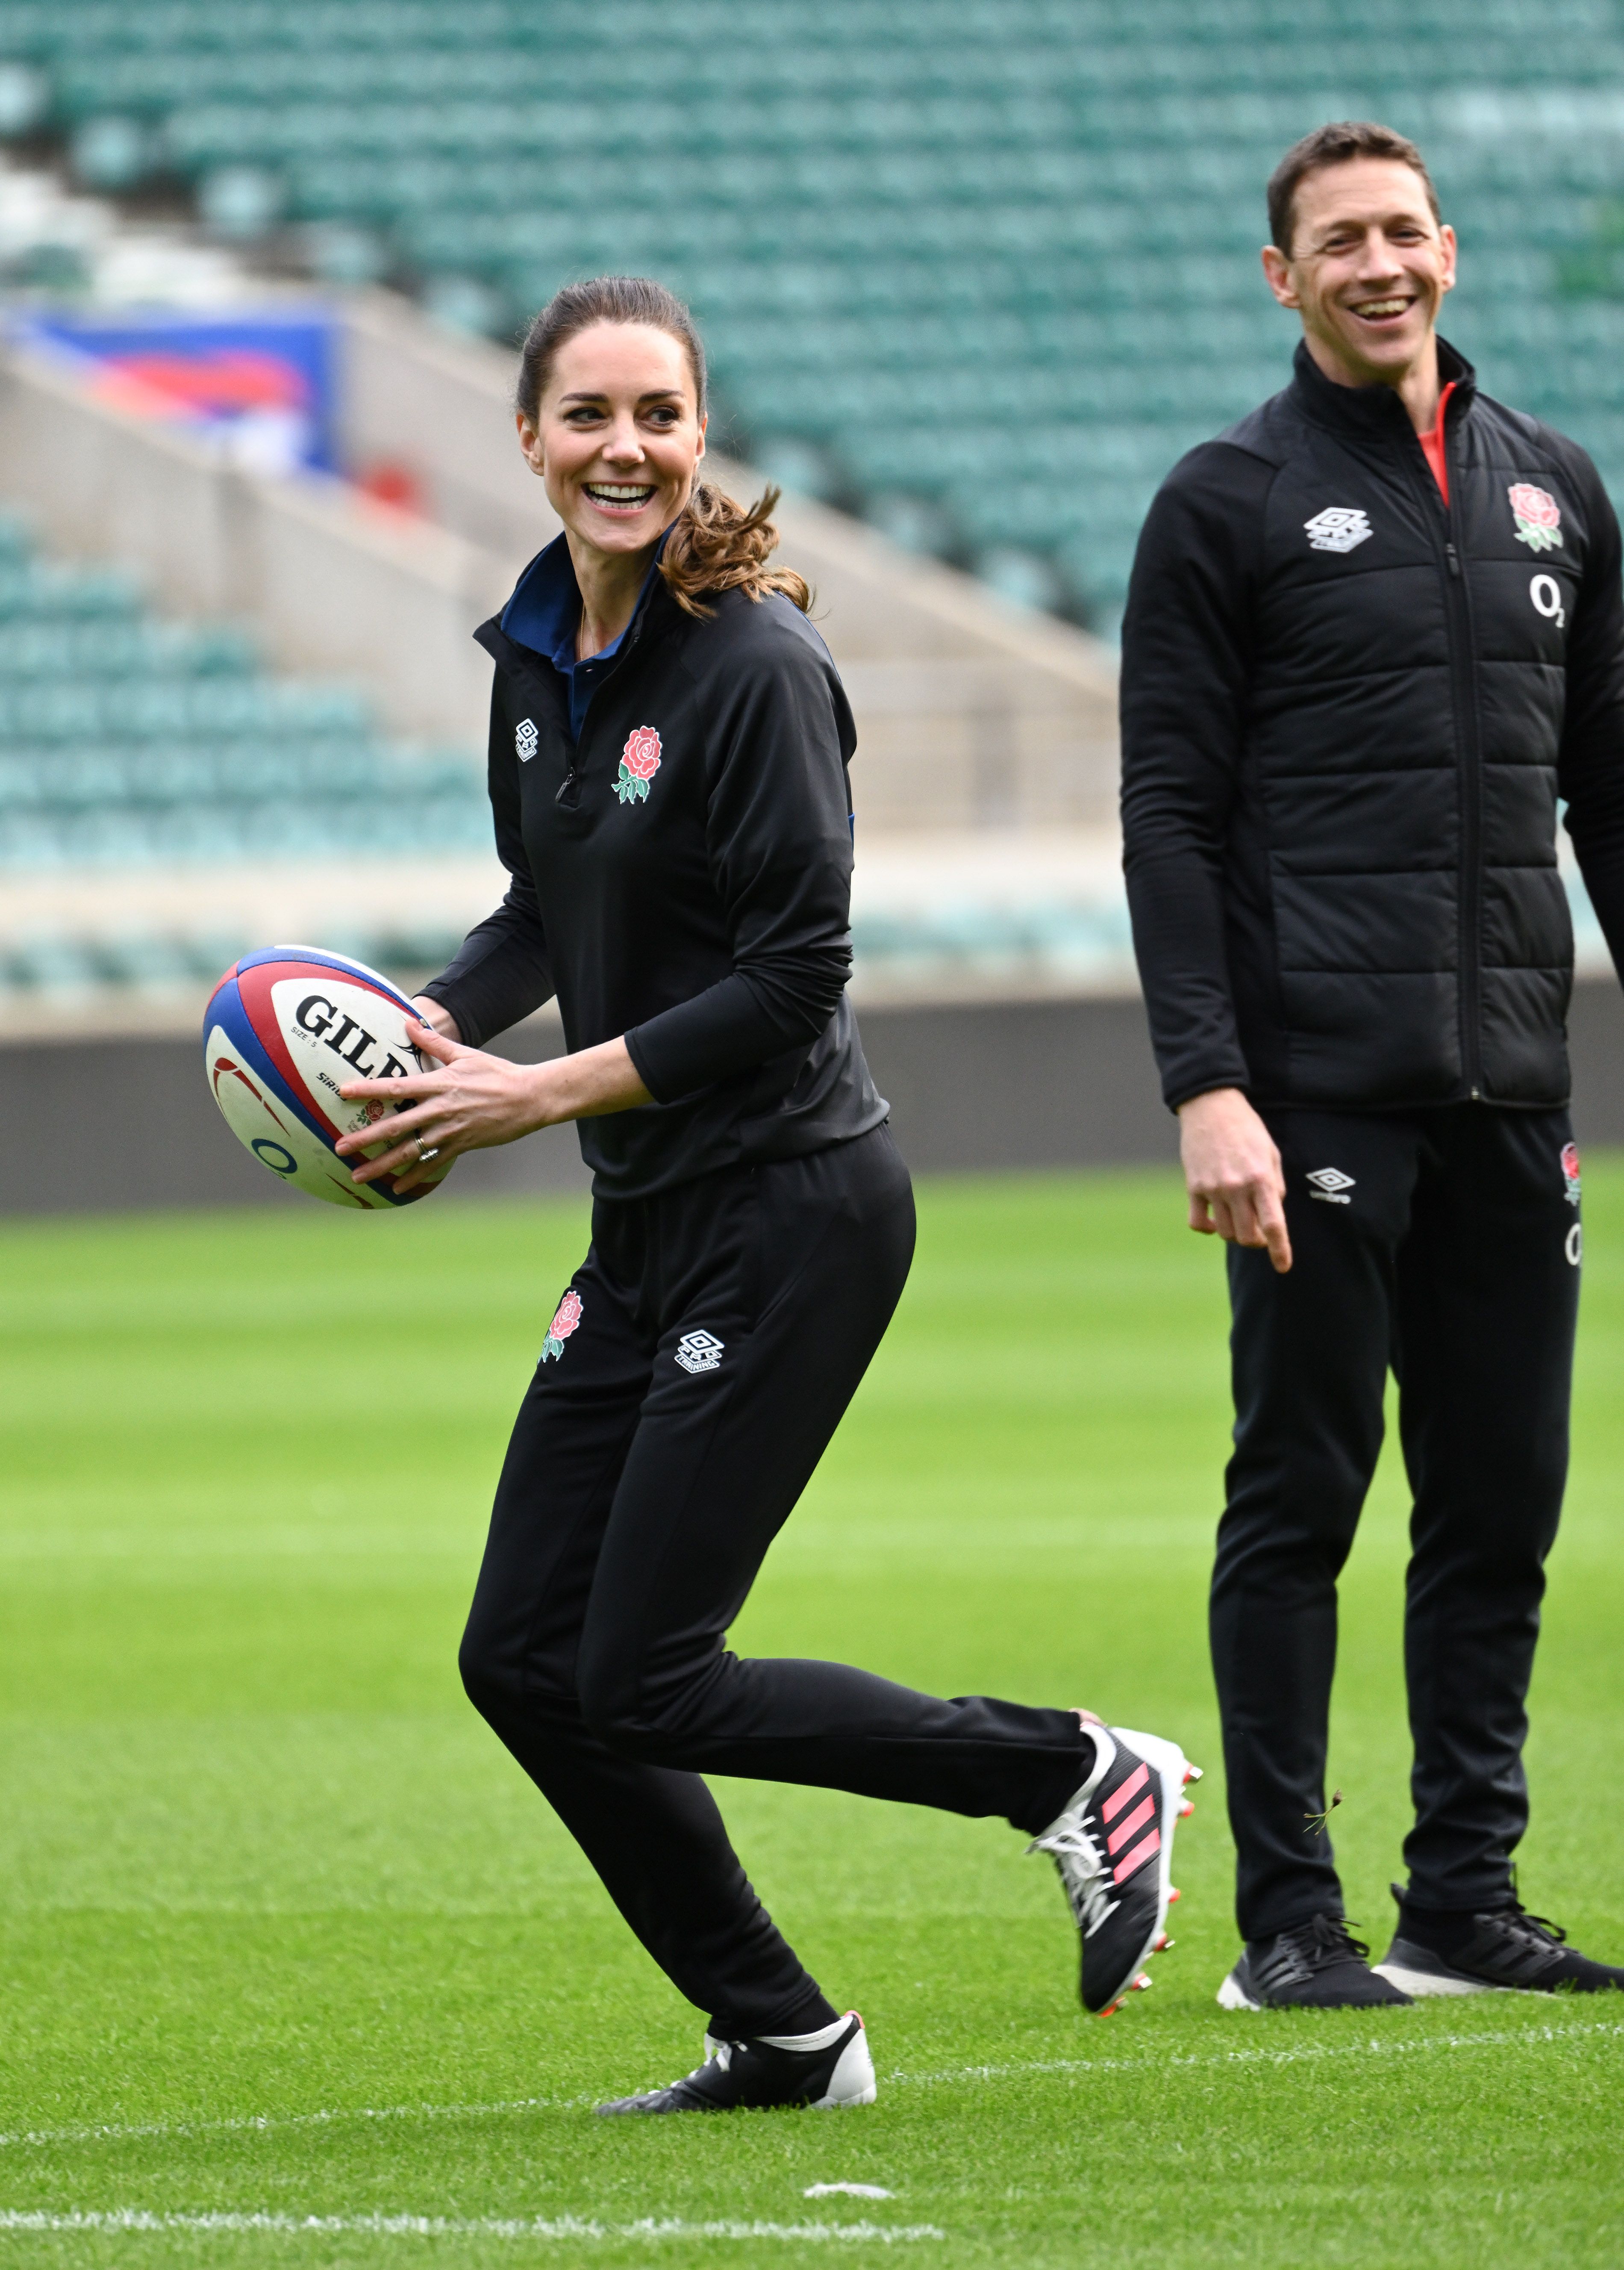 Kate Middleton Inherits Prince Harry's Rugby Patronages